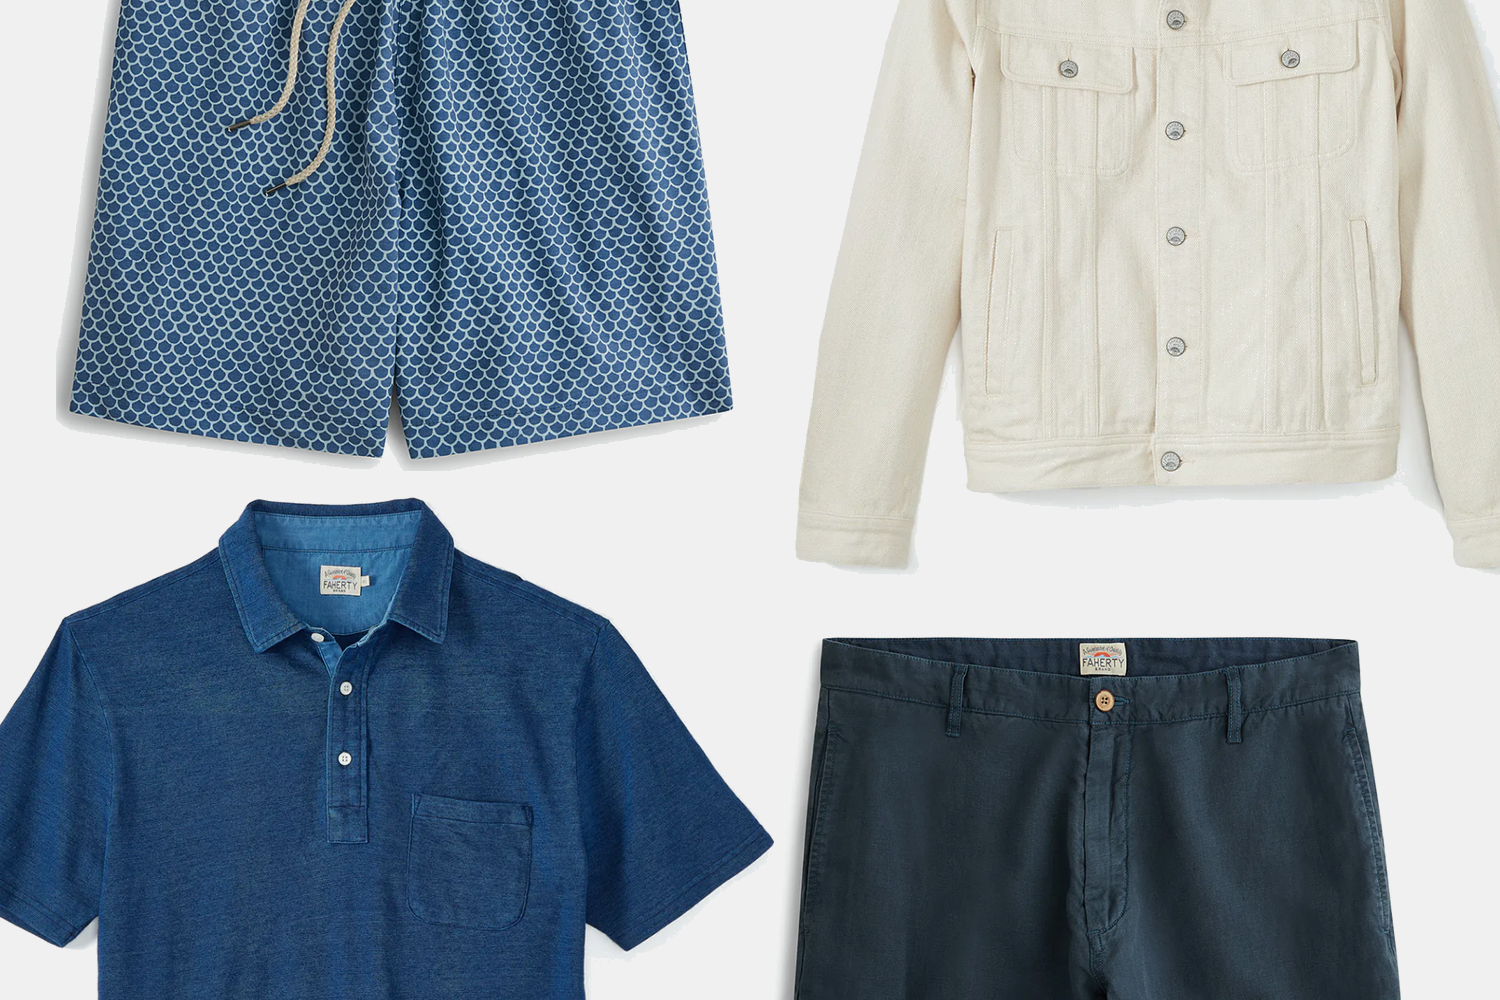 Shop These Crazy Good Faherty Deals at Huckberry